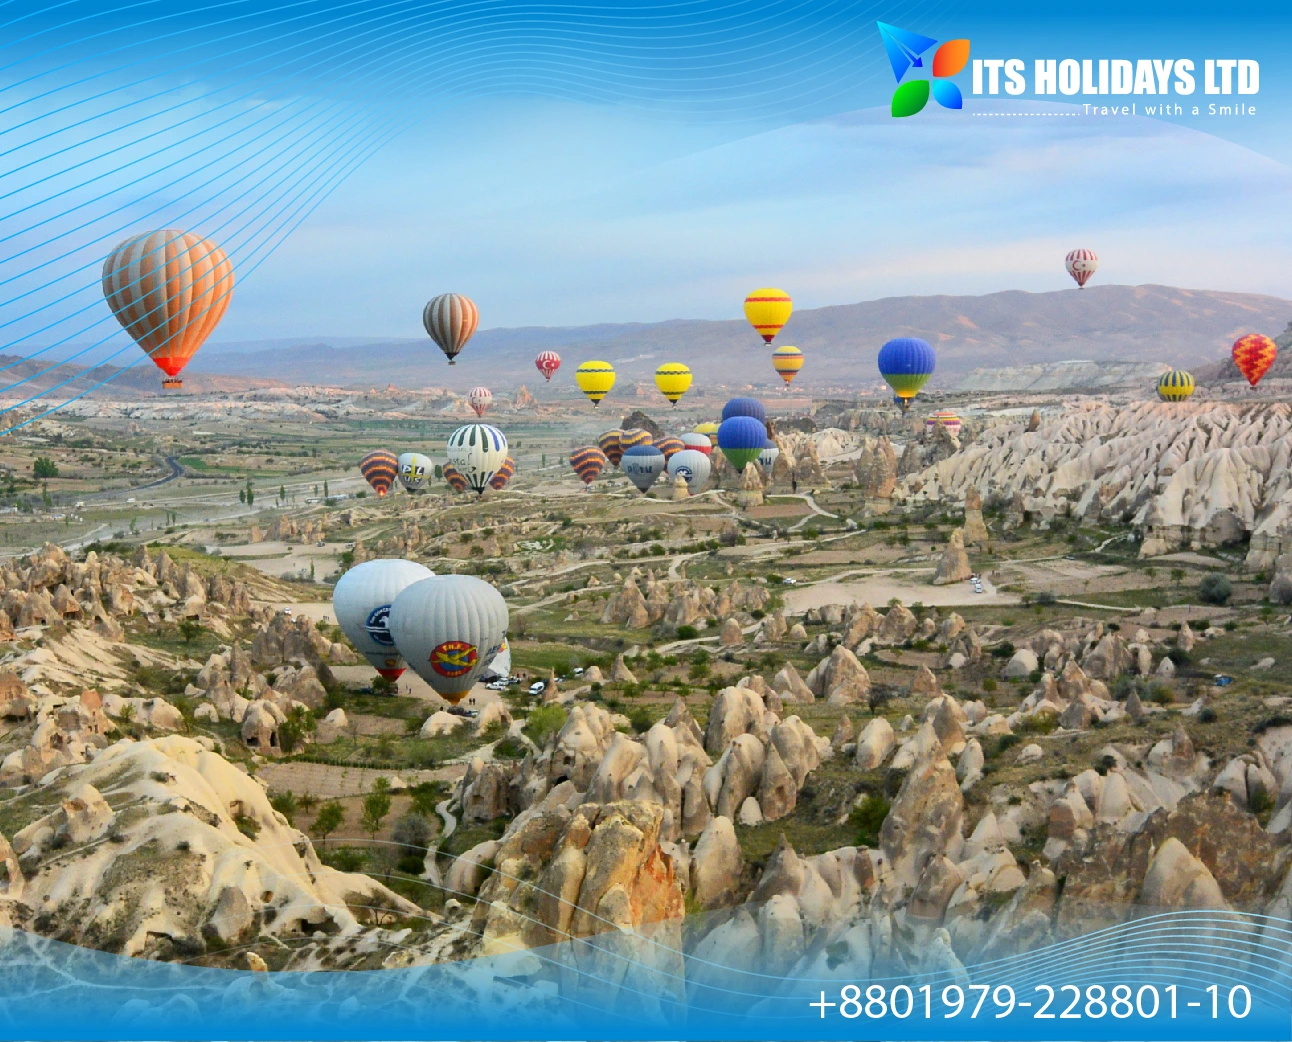 Delight Istanbul and Cappadocia Tour